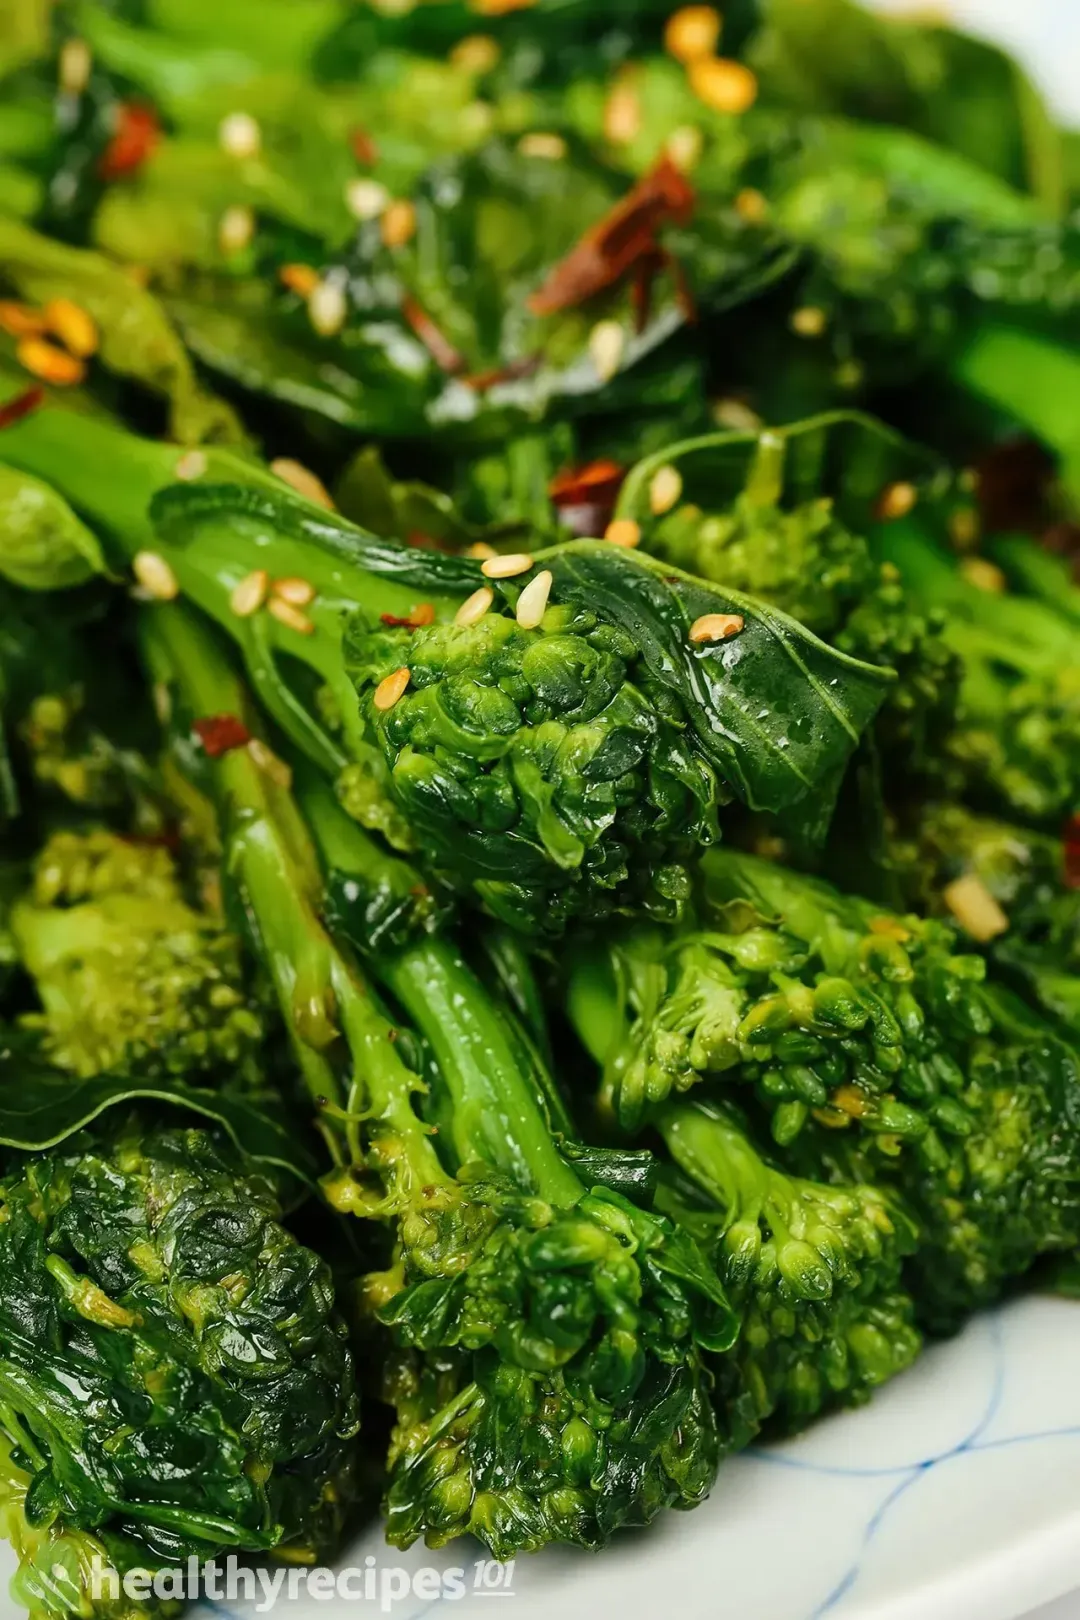 Differences Between Chinese Broccoli and Regular Broccoli